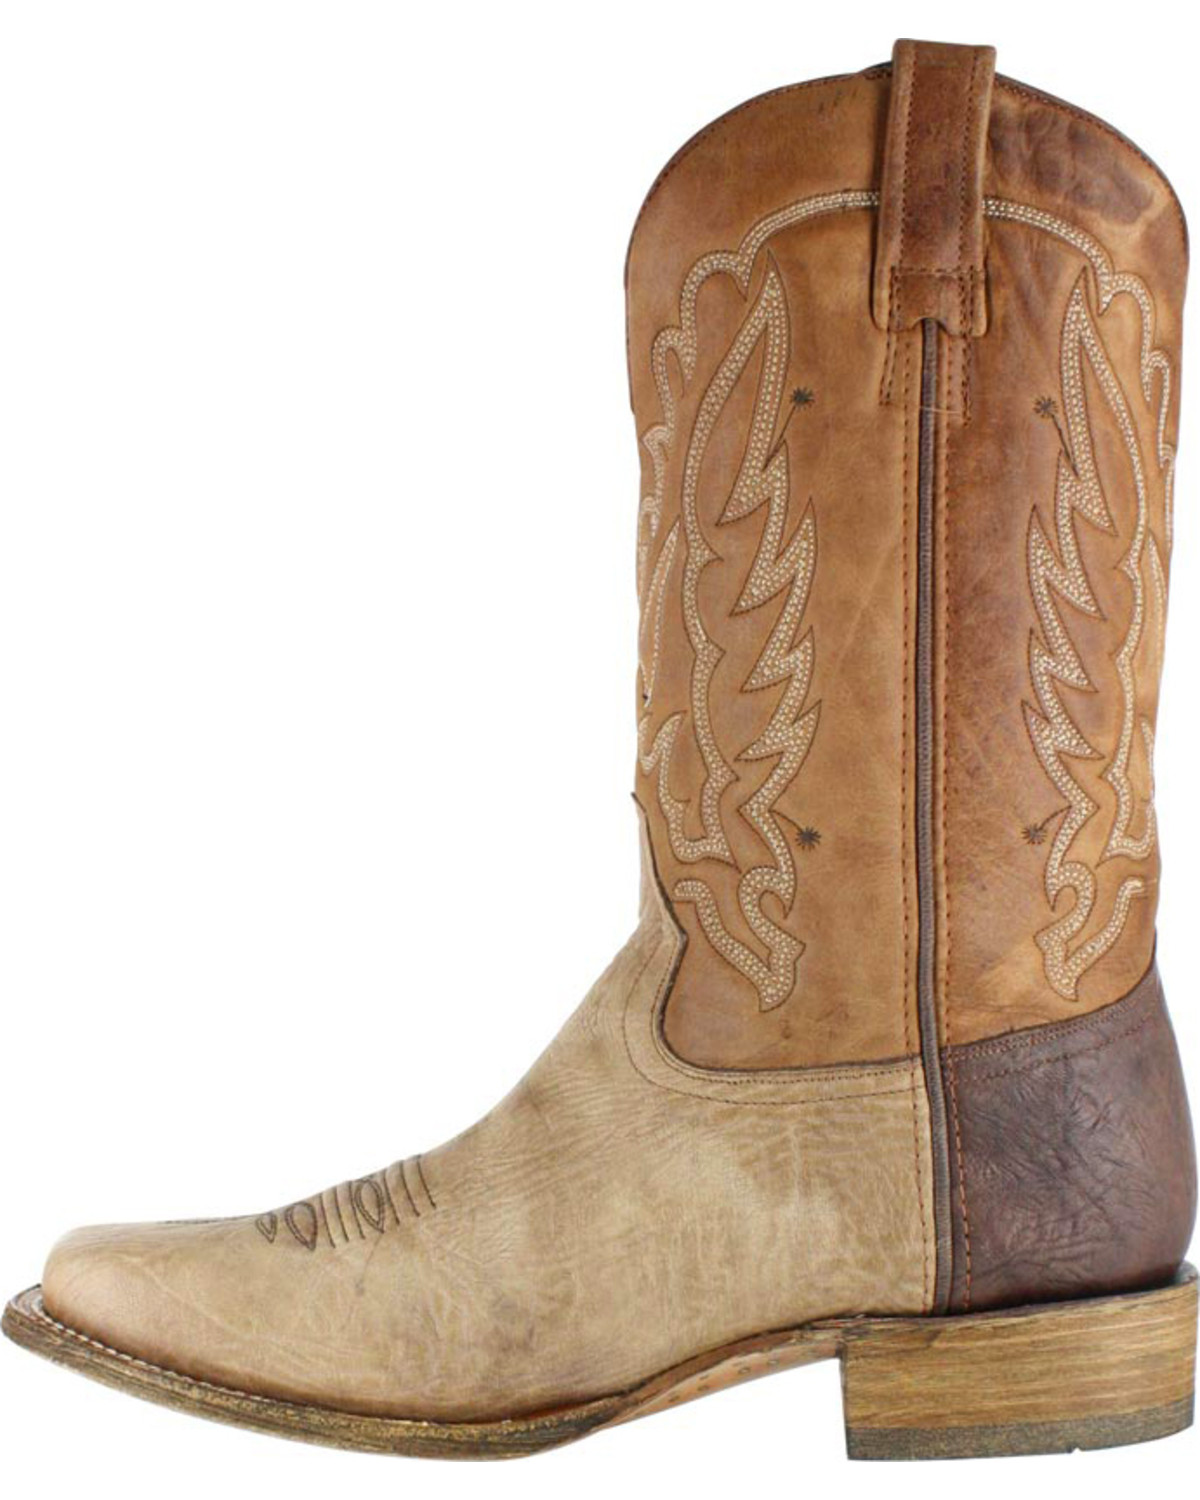 Corral Men's Square Toe Shoulder Western Boots | Boot Barn